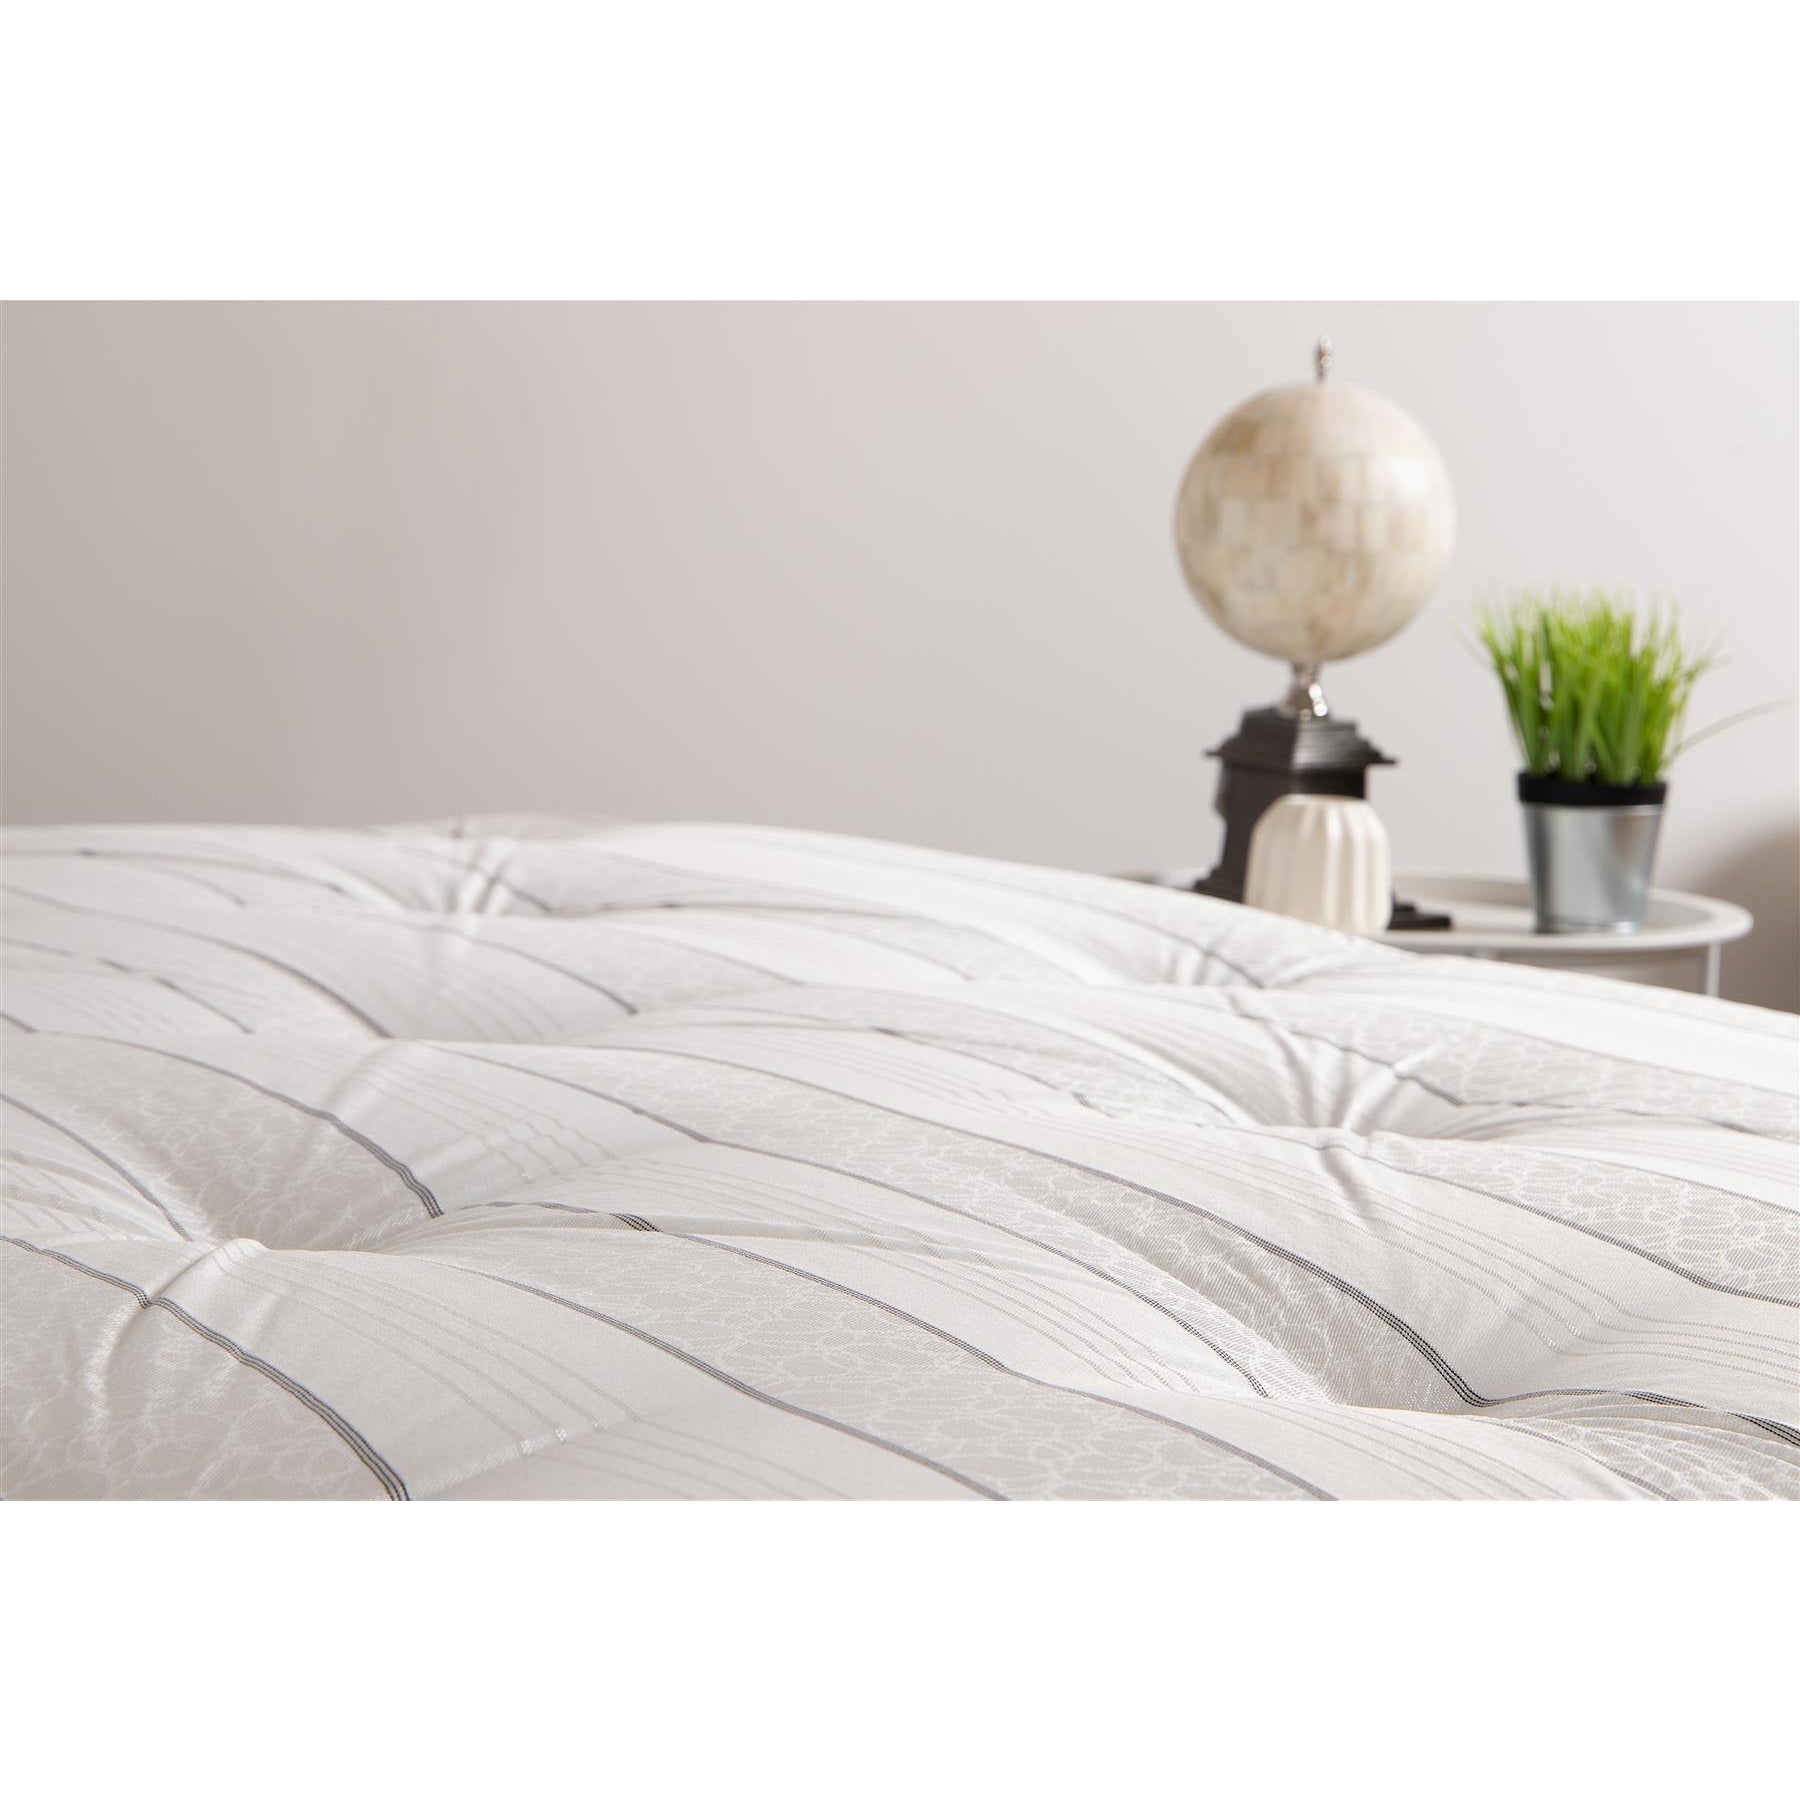 Starlight Beds™ | Traditional Orthopaedic Spring Mattress